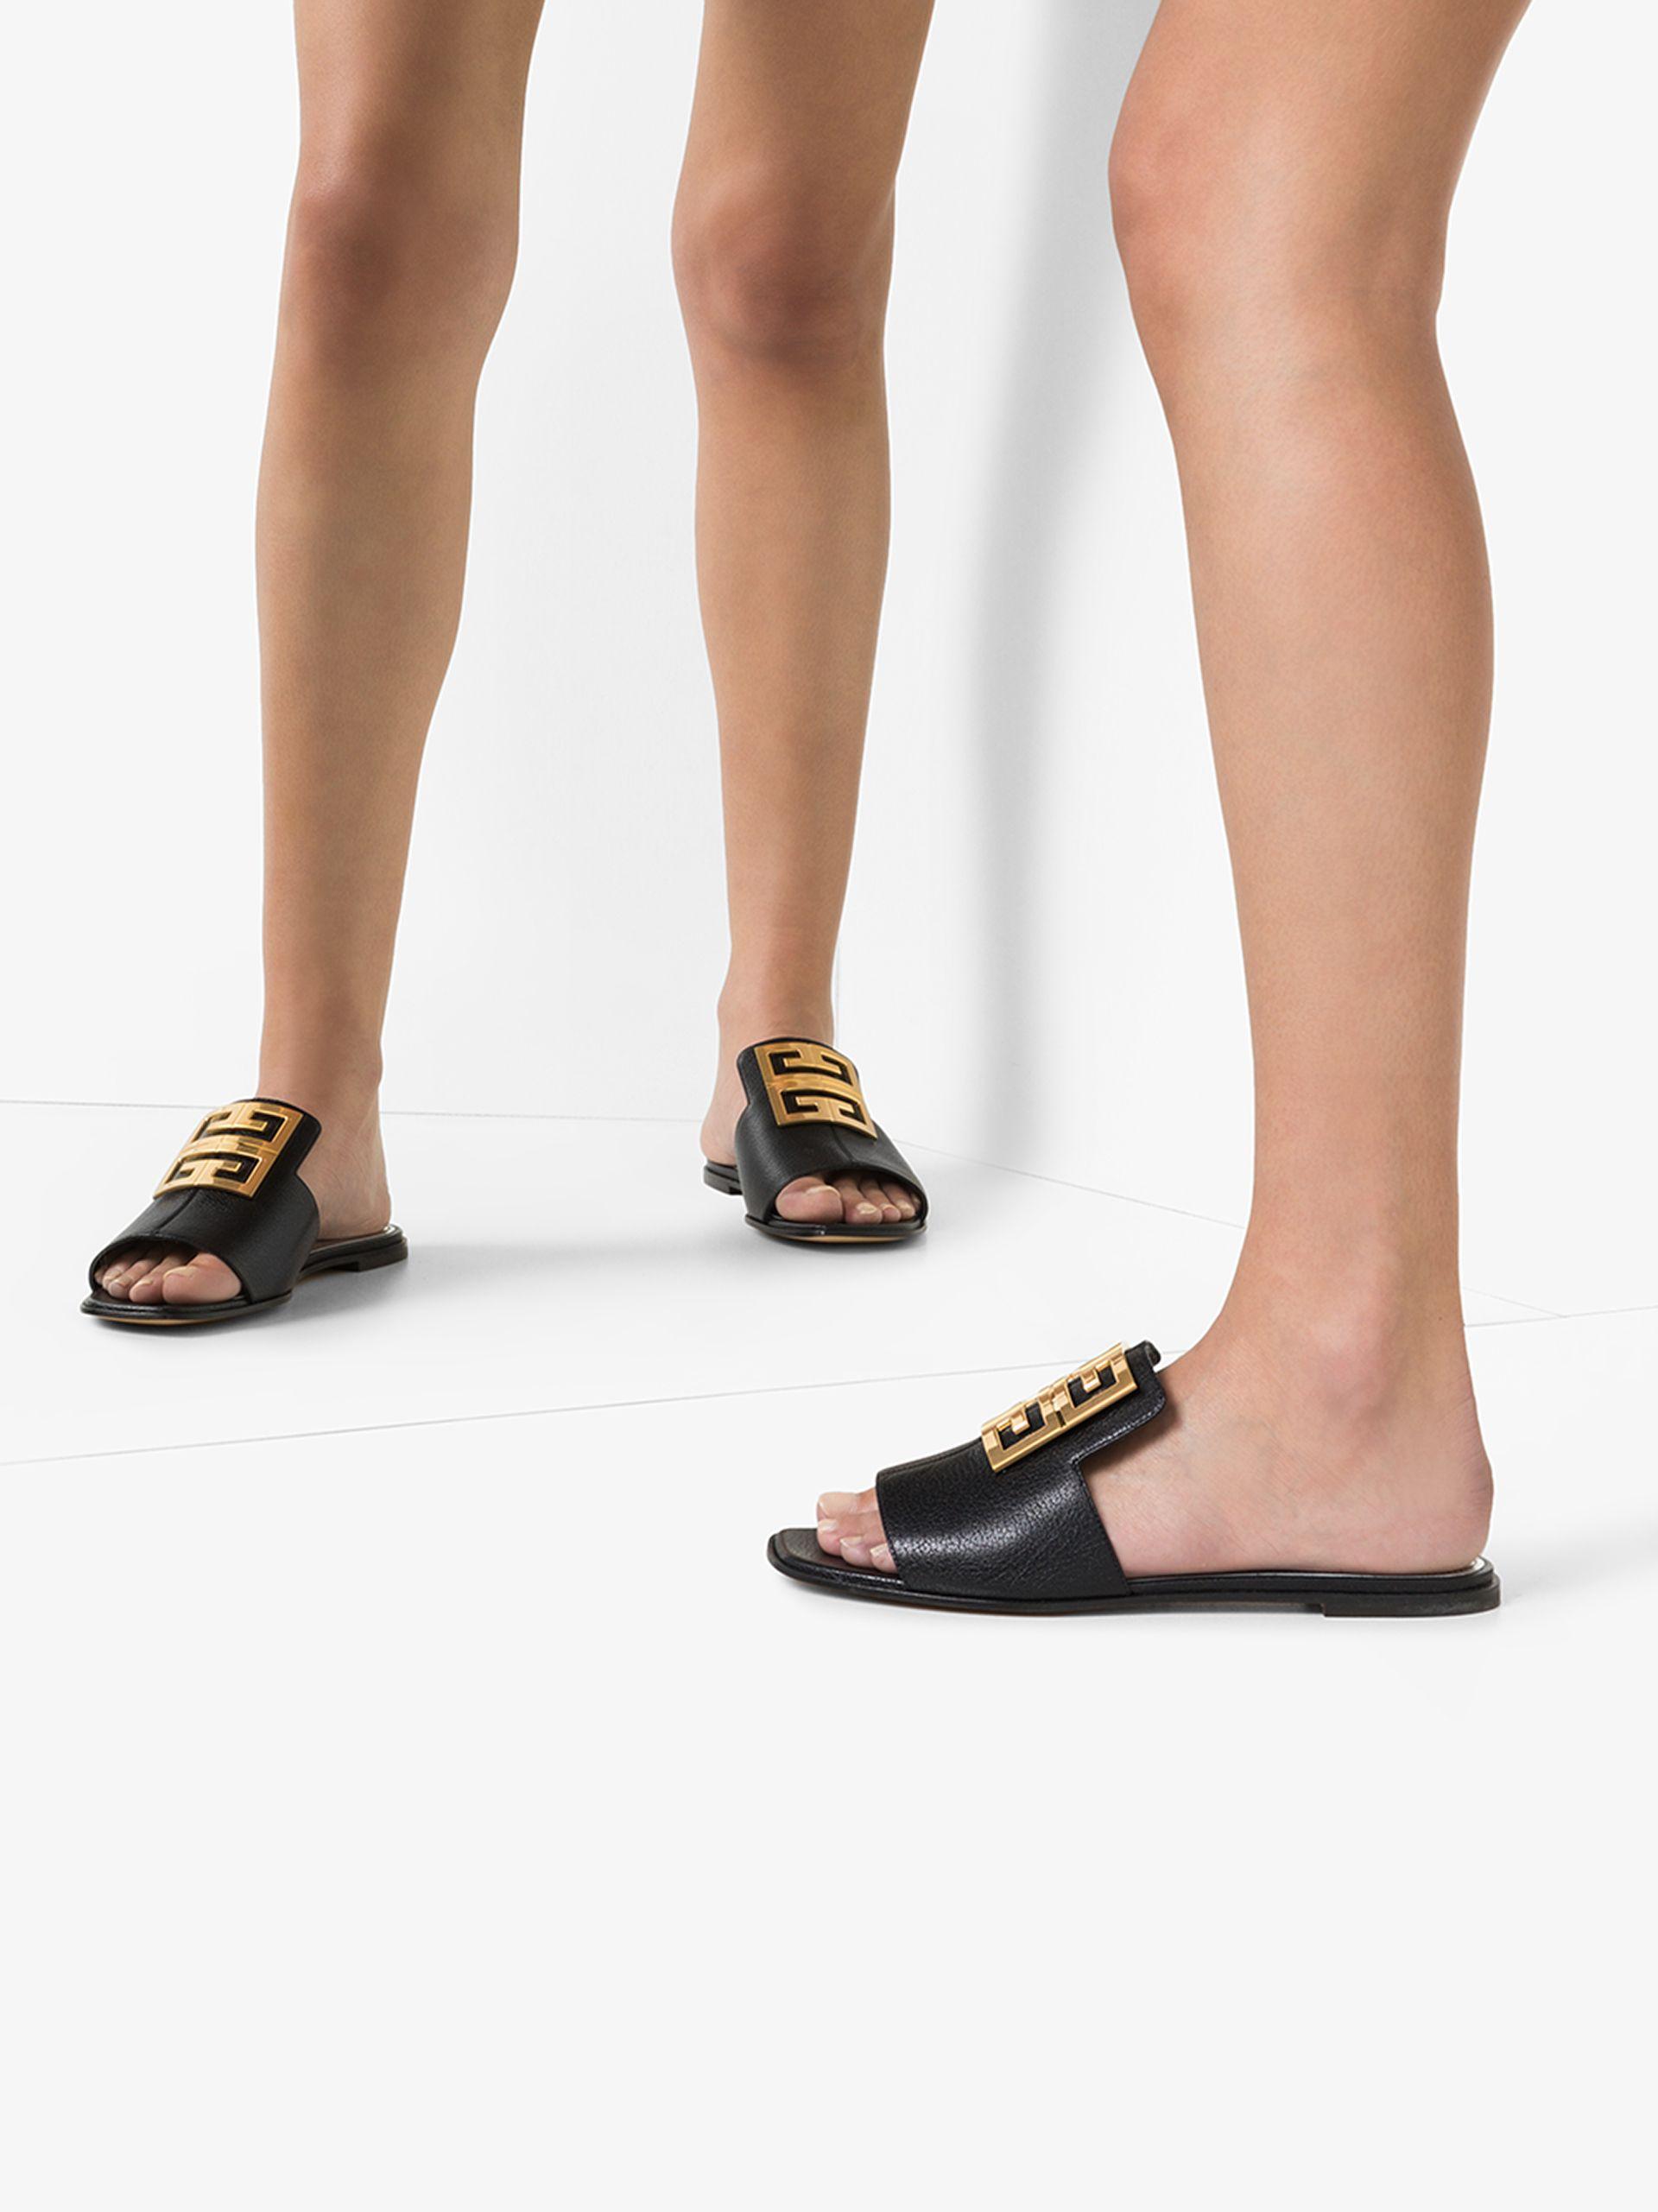 Givenchy 4g Flat Leather Sandals in Black - Save 40% - Lyst